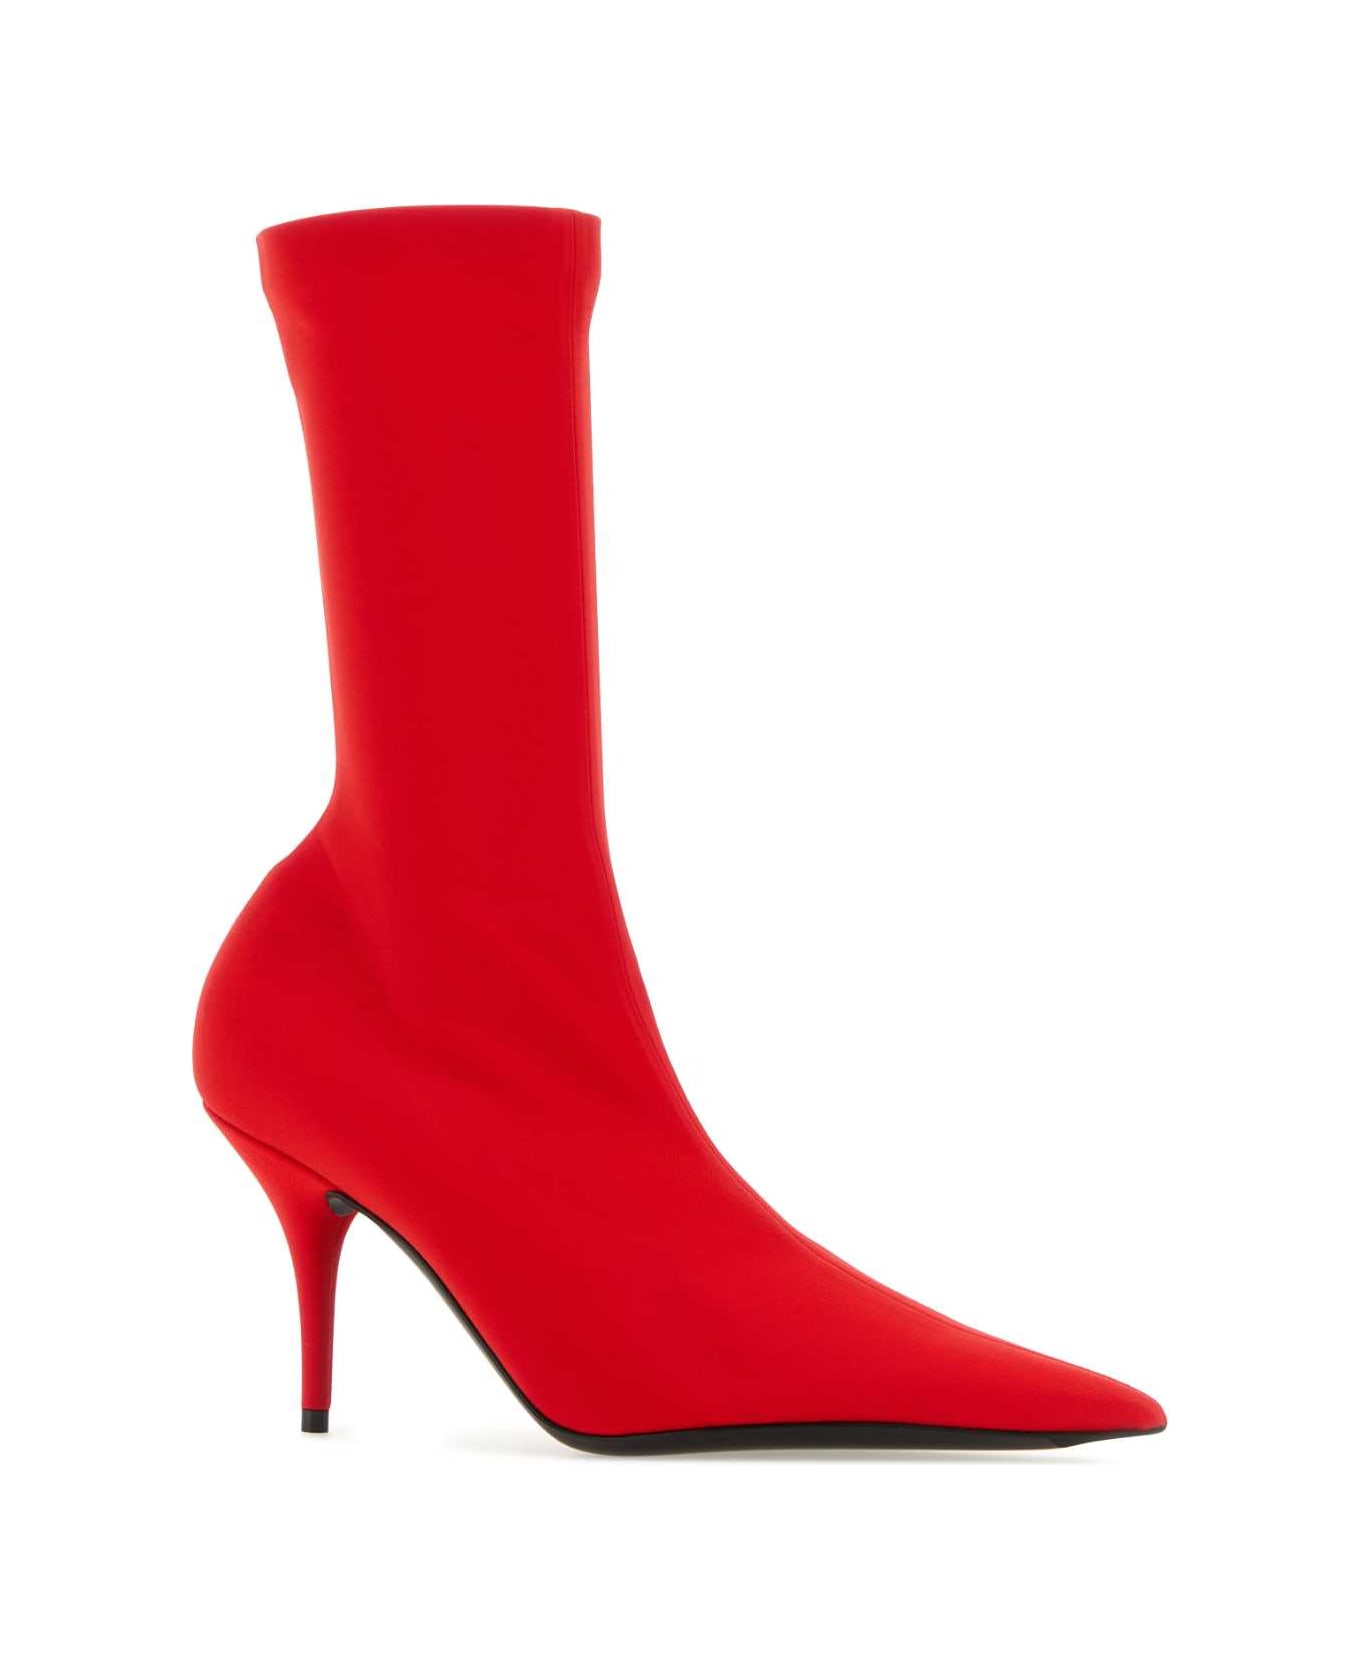 Balenciaga Red Fabric Knife Ankle Boots - 6090 ブーツ